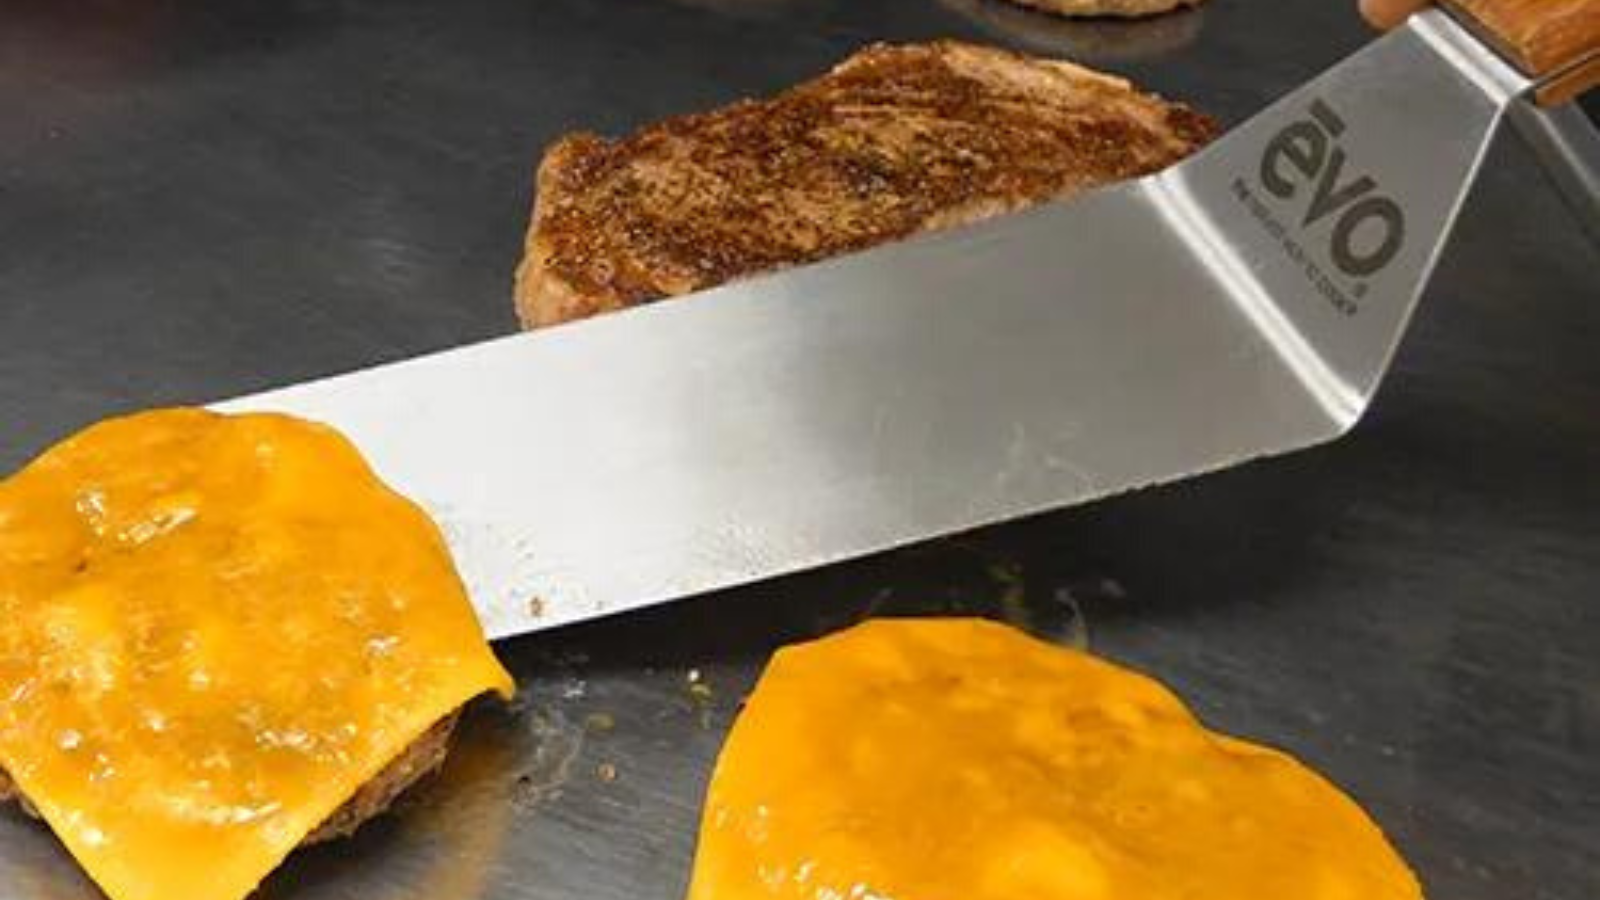 Long spatula with Evo logo on top sliding under one cheeseburger on griddle. Hamburger on griddle to left of spatular and another cheeseburger on griddle to right of spatula.